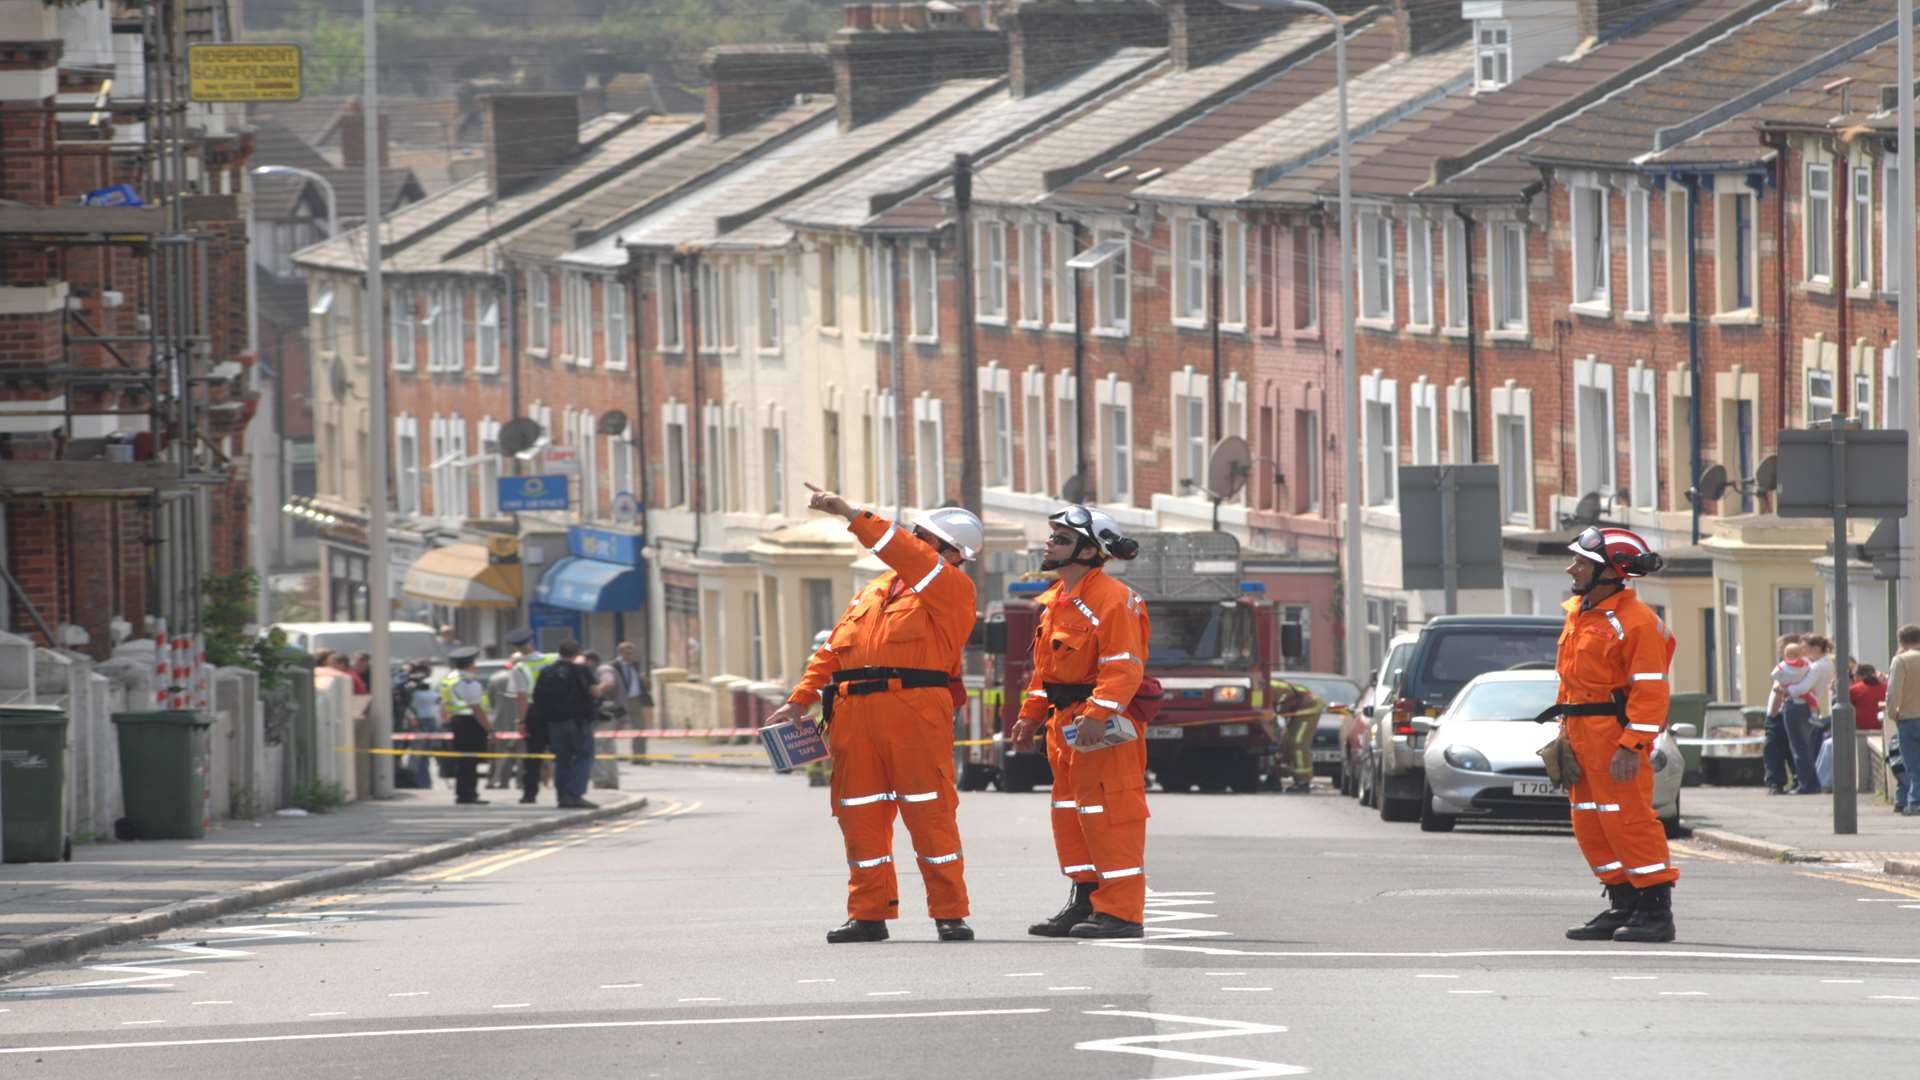 Blackbull Road in Folkestone was sealed off while damage assessments were carried out.